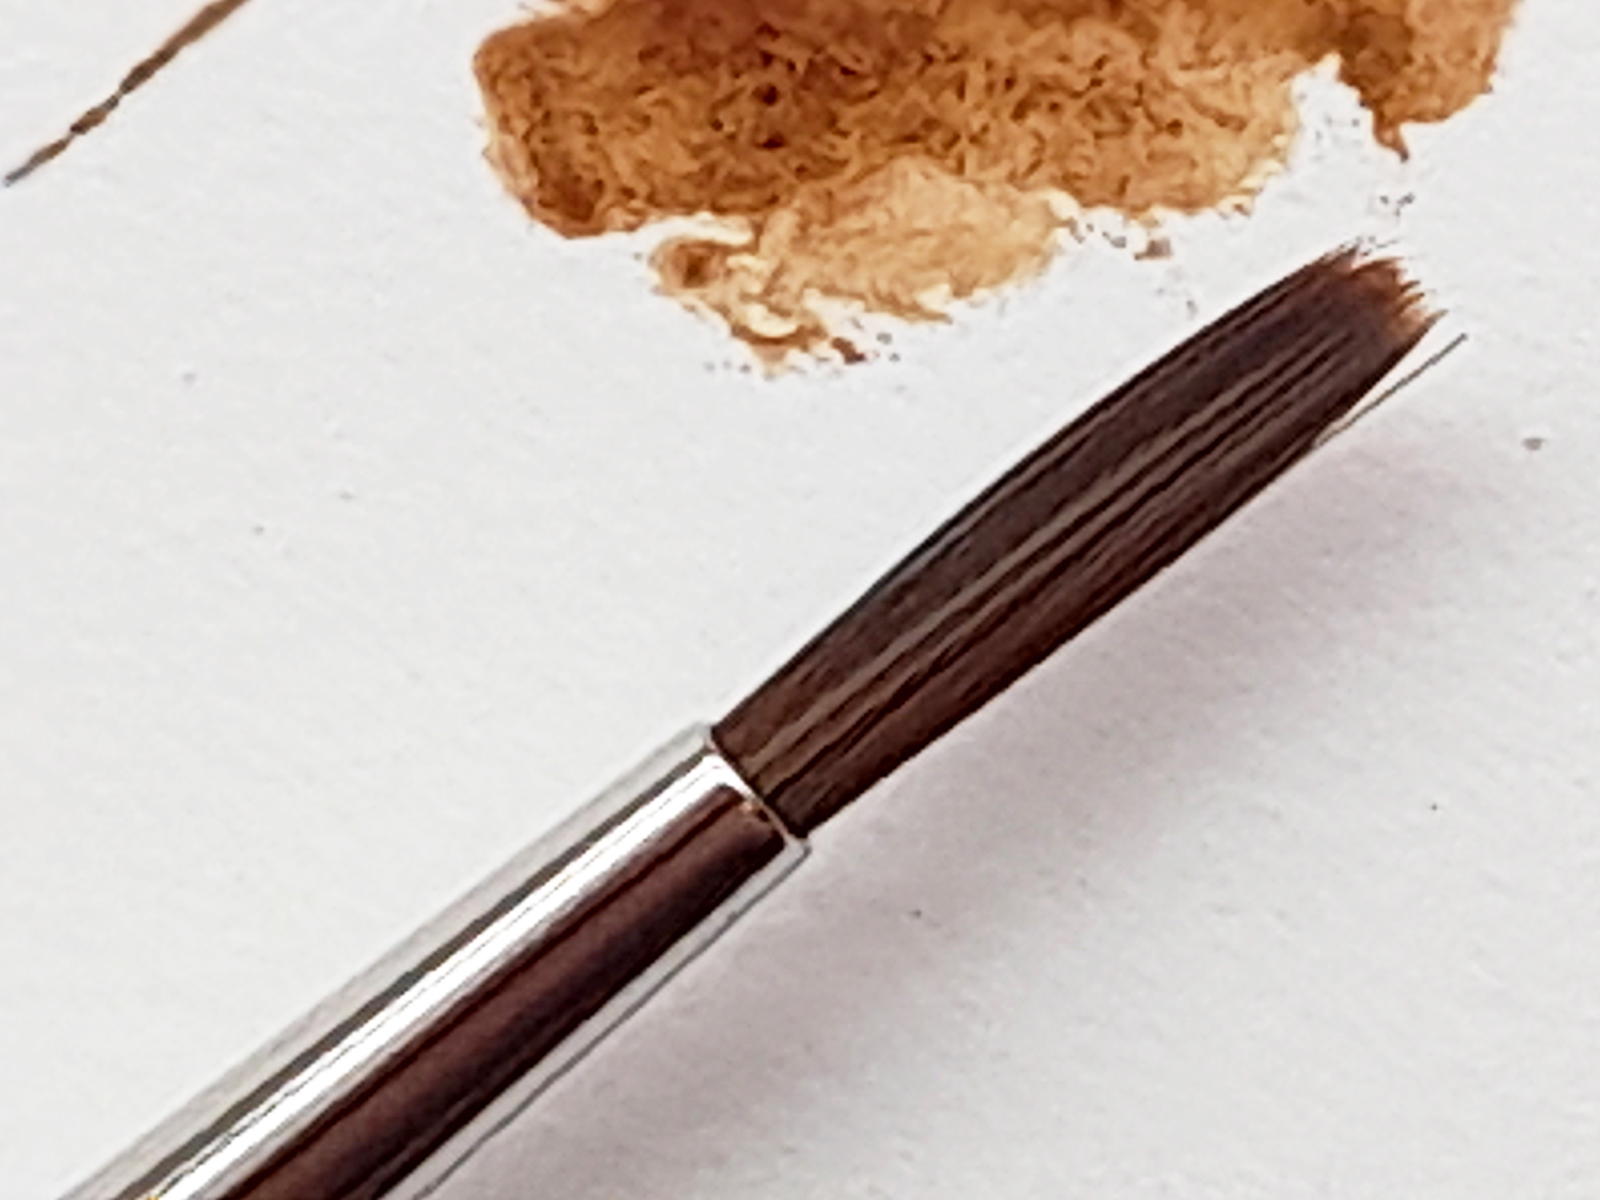 Introducing Da Vinci's Colineo Synthetic Watercolour Brushes